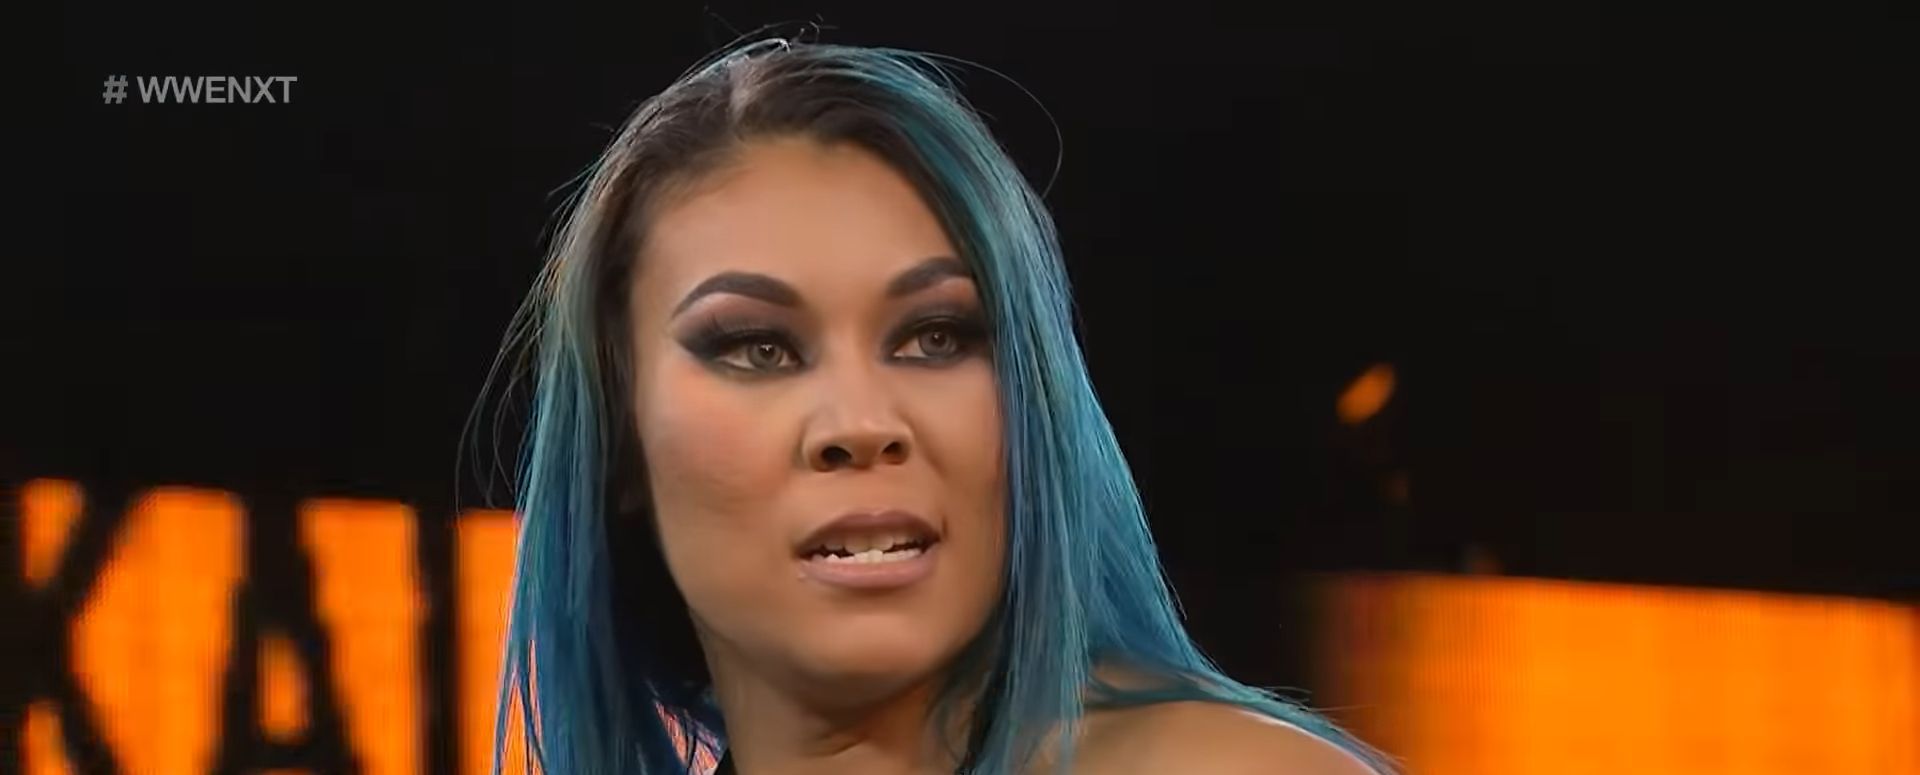 Mia Yim is a former Knockouts Champion